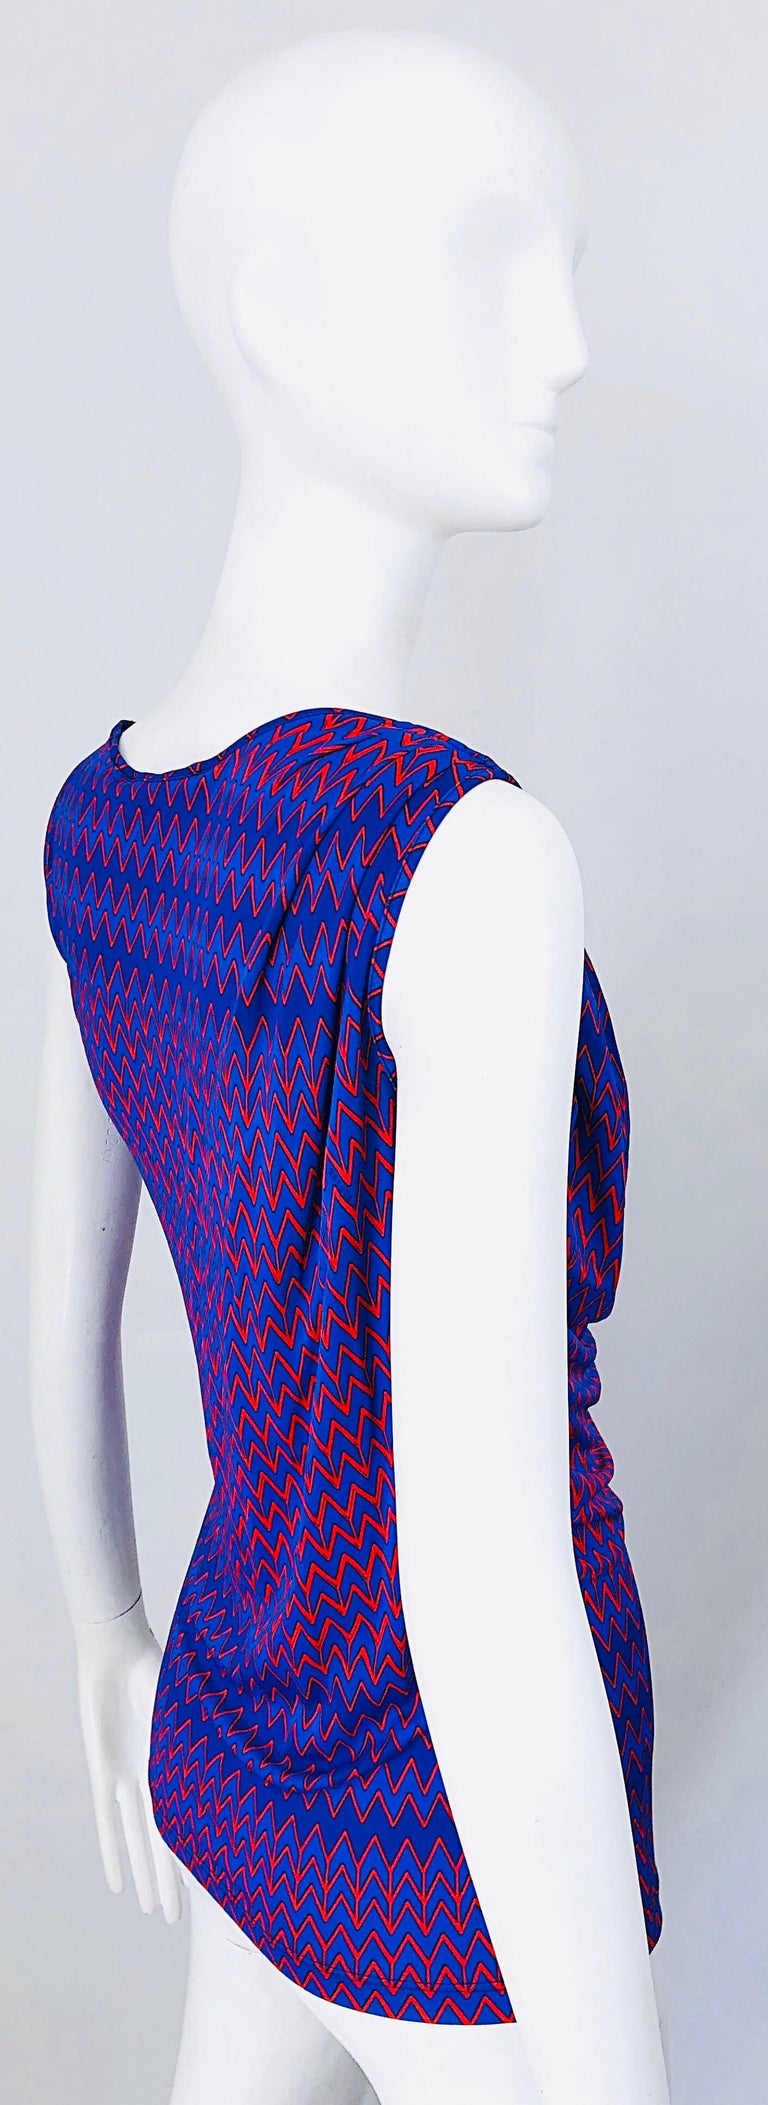 2000s Versace Versus Blue + Red Rayon Jersey Chevron Print Sleeveless Shirt Top In New Condition For Sale In San Diego, CA